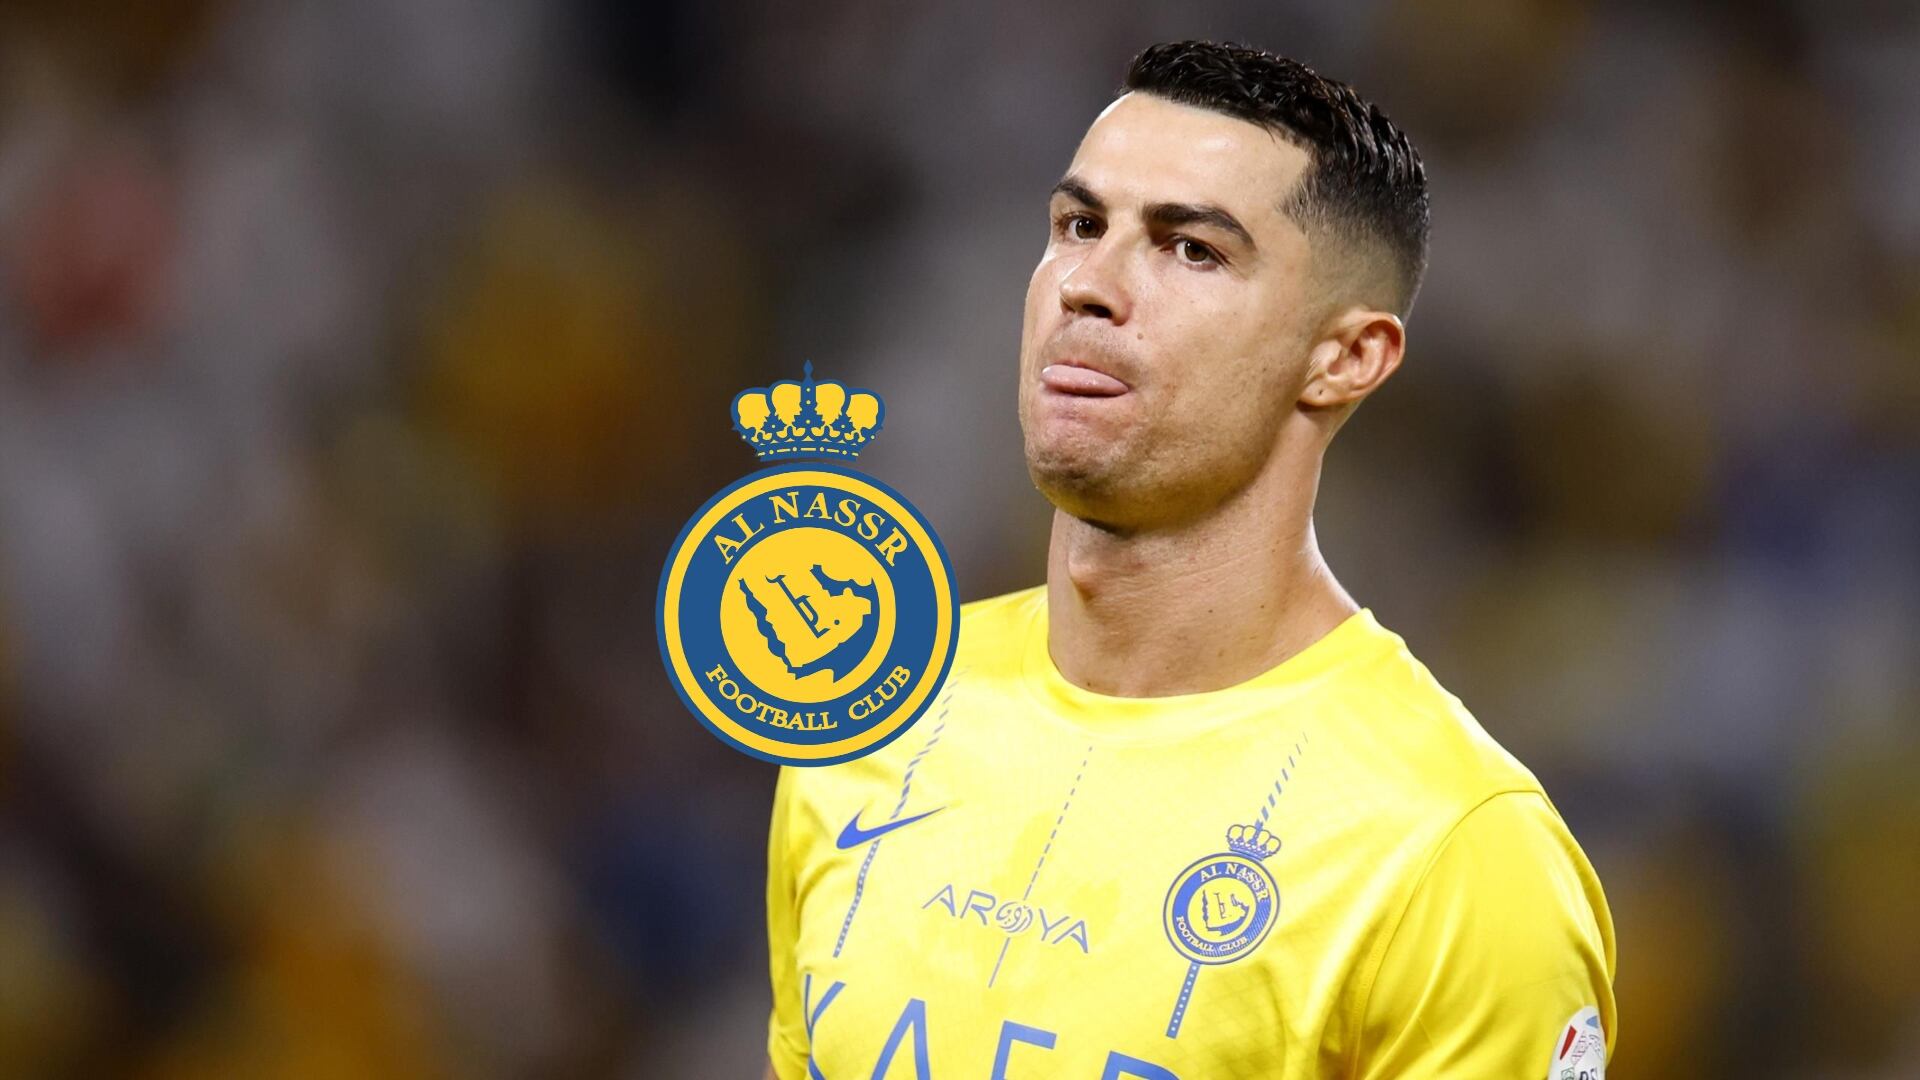 Cristiano is not as selfish as people think, Al Nassr's assistant coach amazing comments that reveals his true character